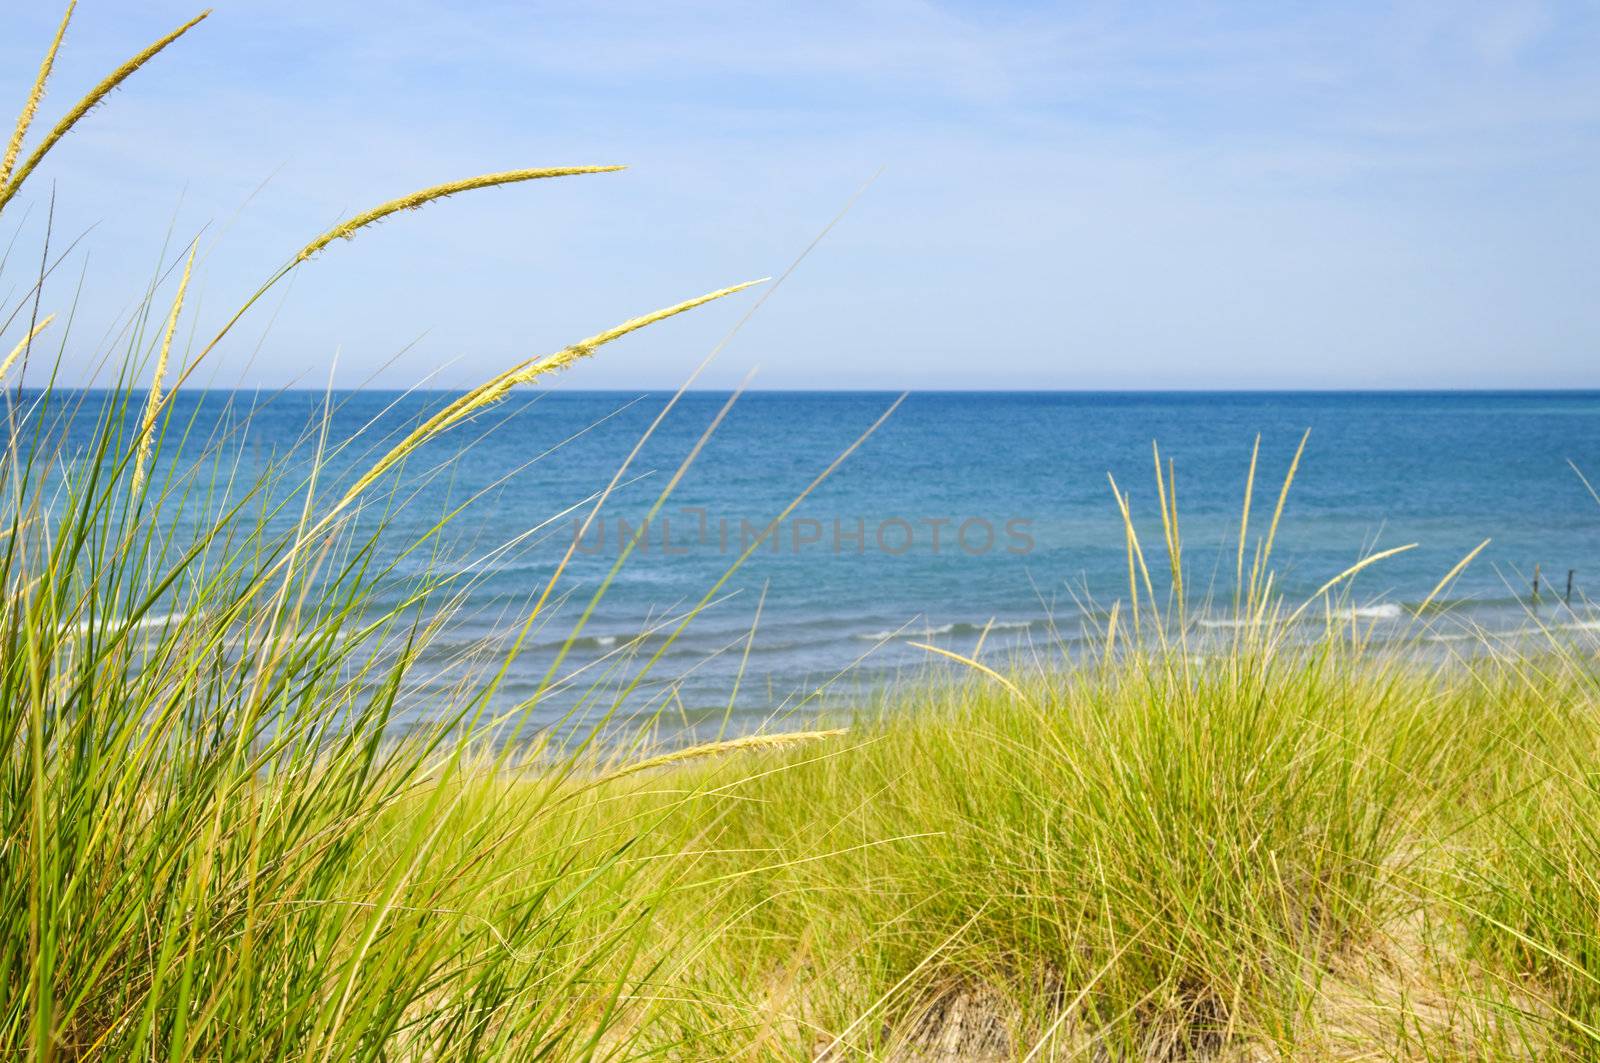 Grass on sand dunes at beach. Pinery provincial park, Ontario Canada